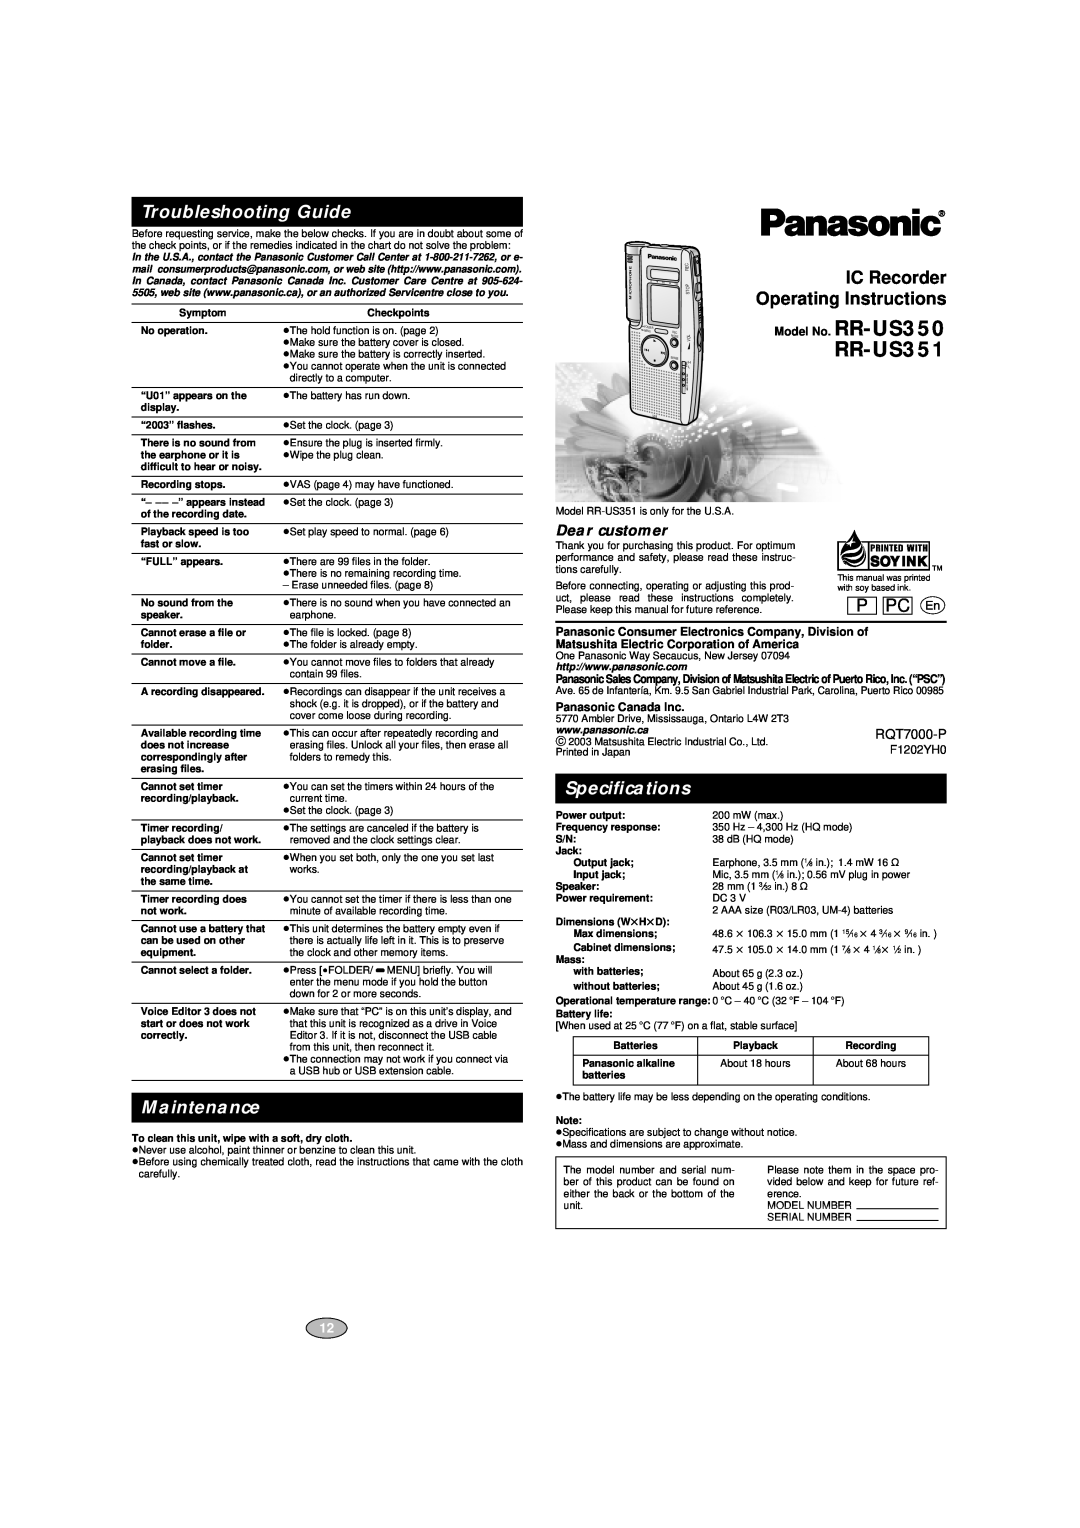 Panasonic RR-US351 specifications Troubleshooting Guide, Maintenance, Speciﬁcations, IC Recorder Operating Instructions 